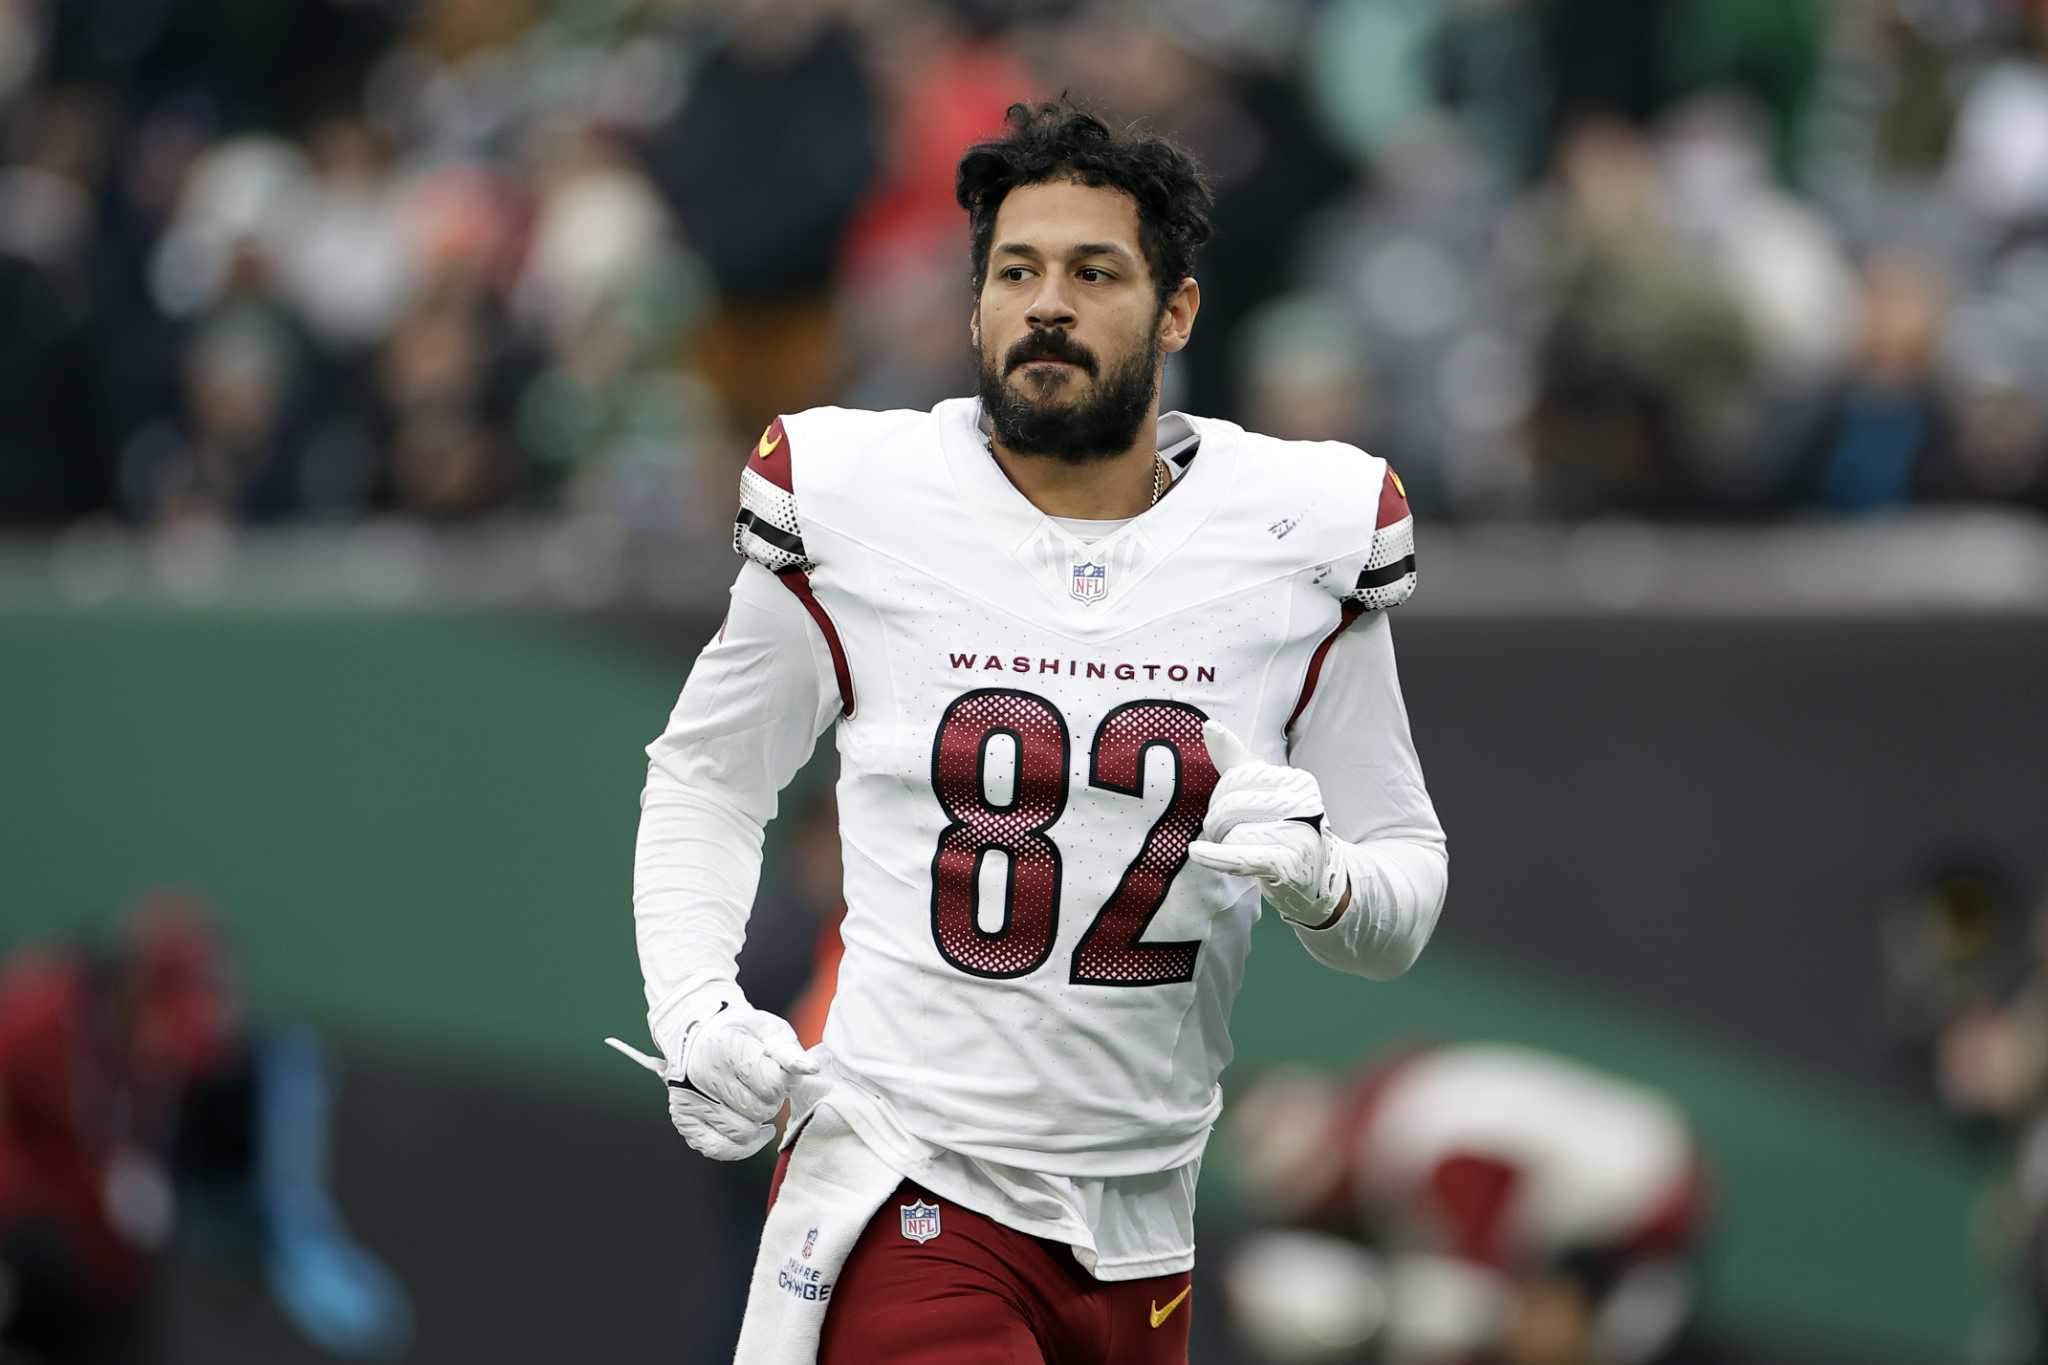 49ers agree to a deal with free agent tight end Logan Thomas, AP source says